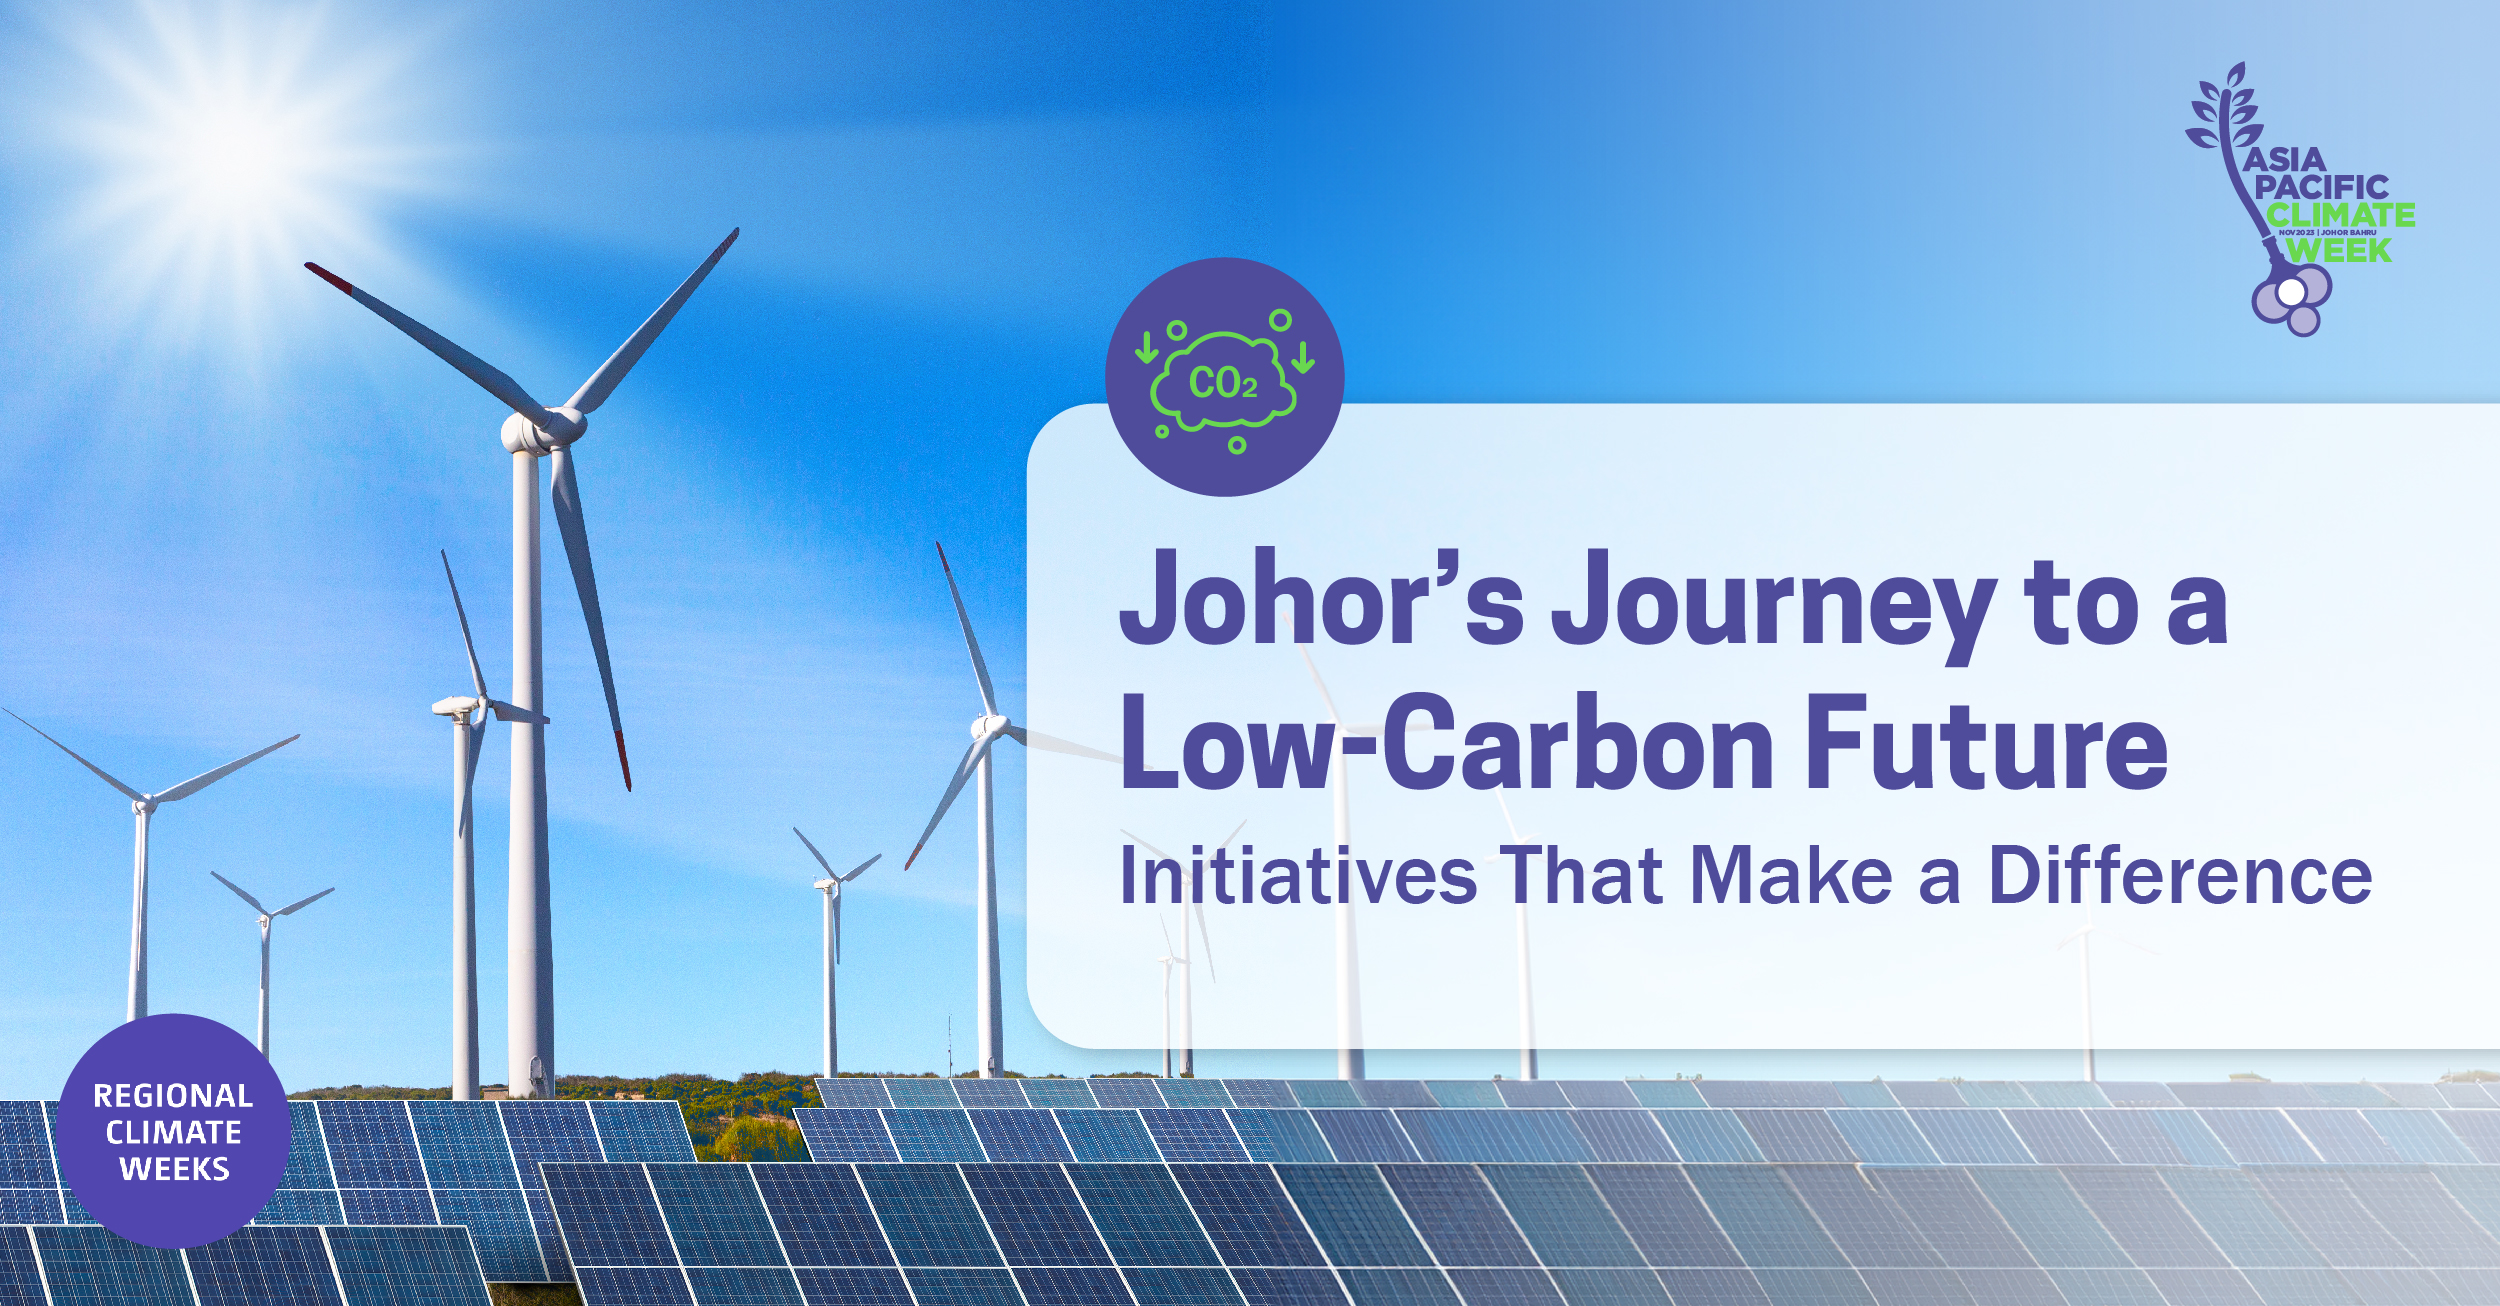 Johor’s Journey to a Low-Carbon Future: Initiatives That Make a Difference